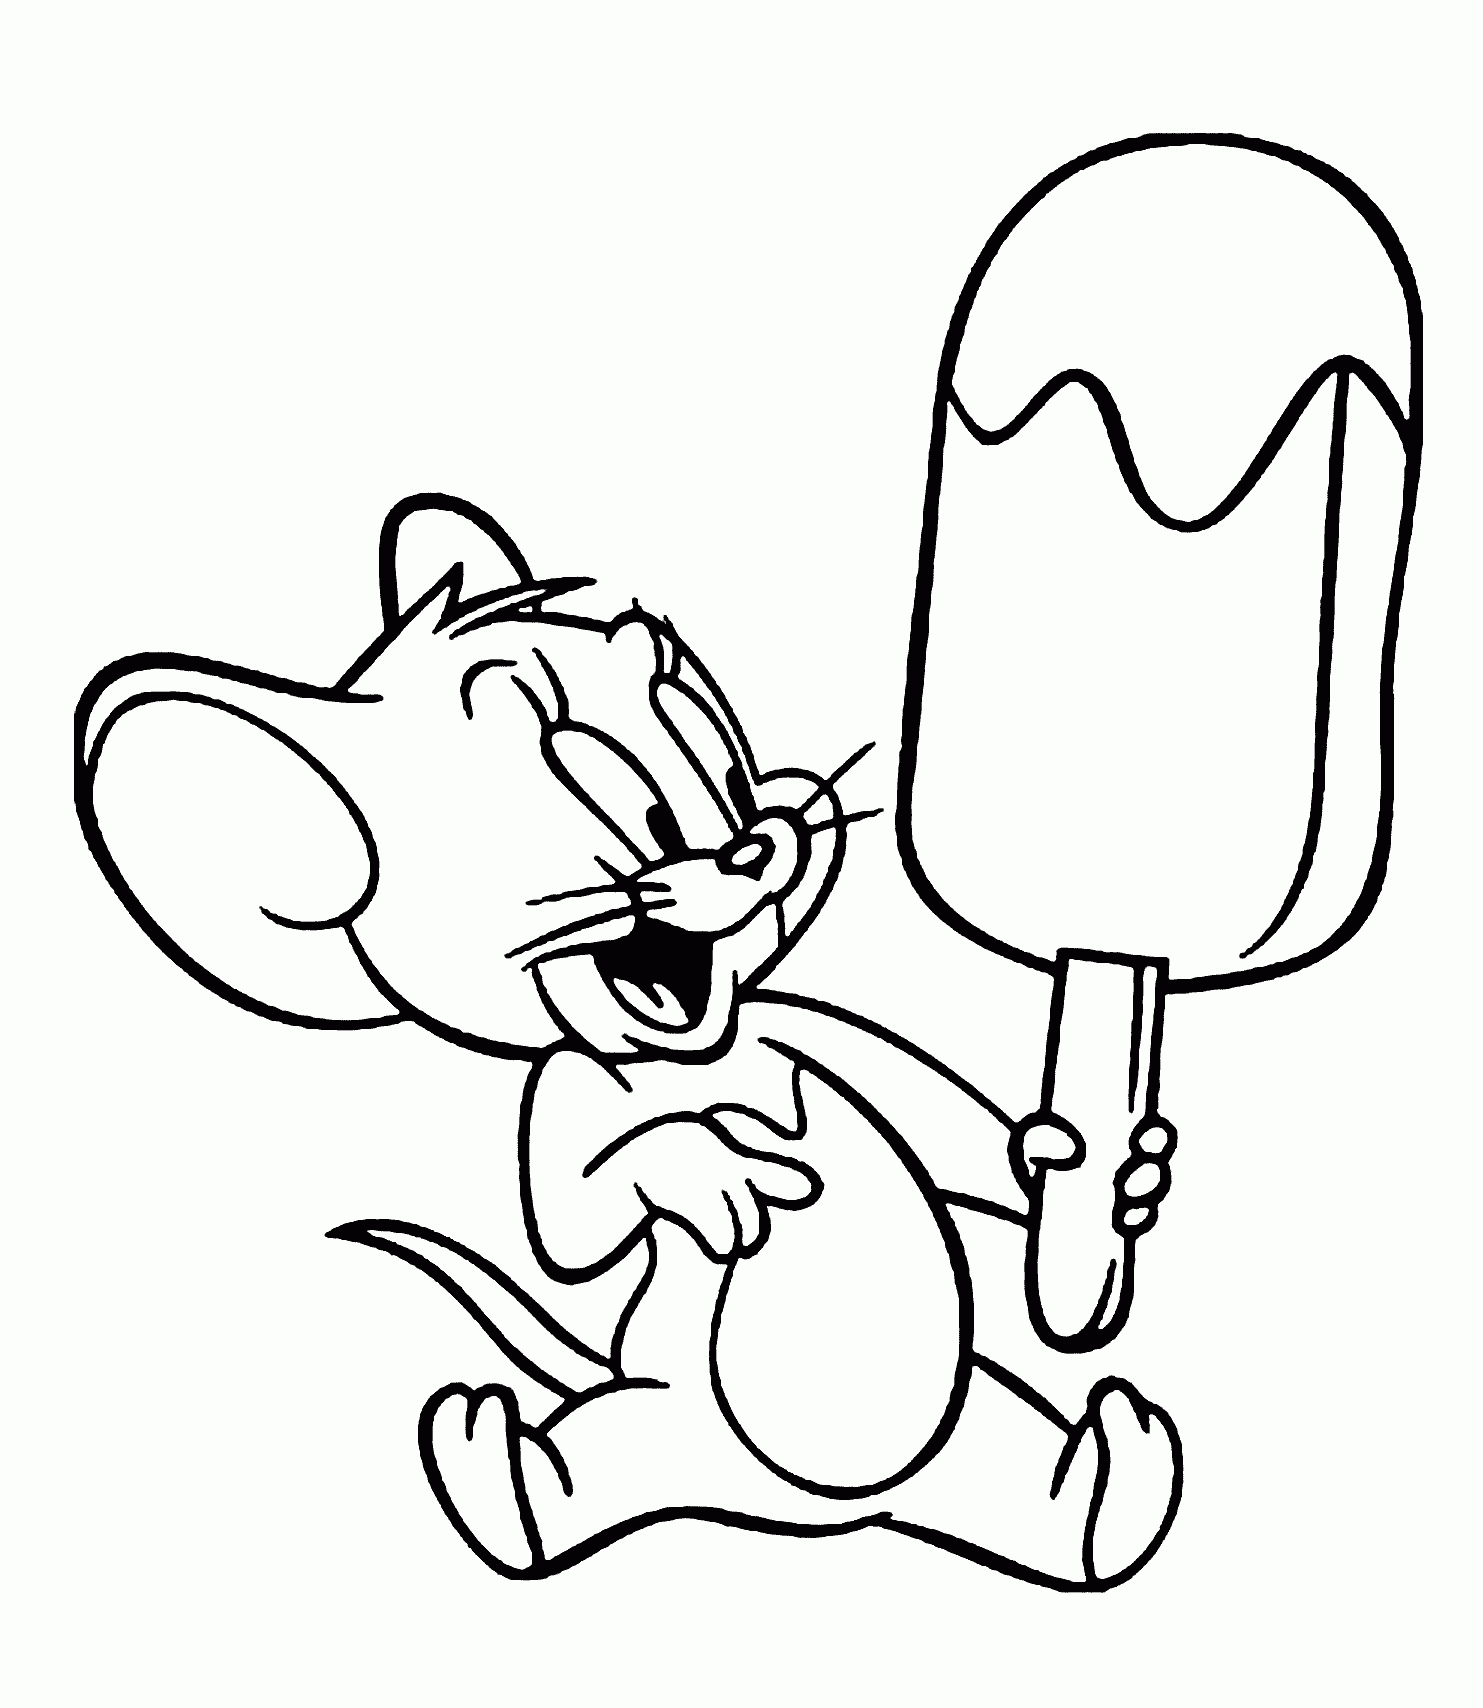 Related Tom And Jerry Coloring Pages Item 20, Tom And Jerry ...